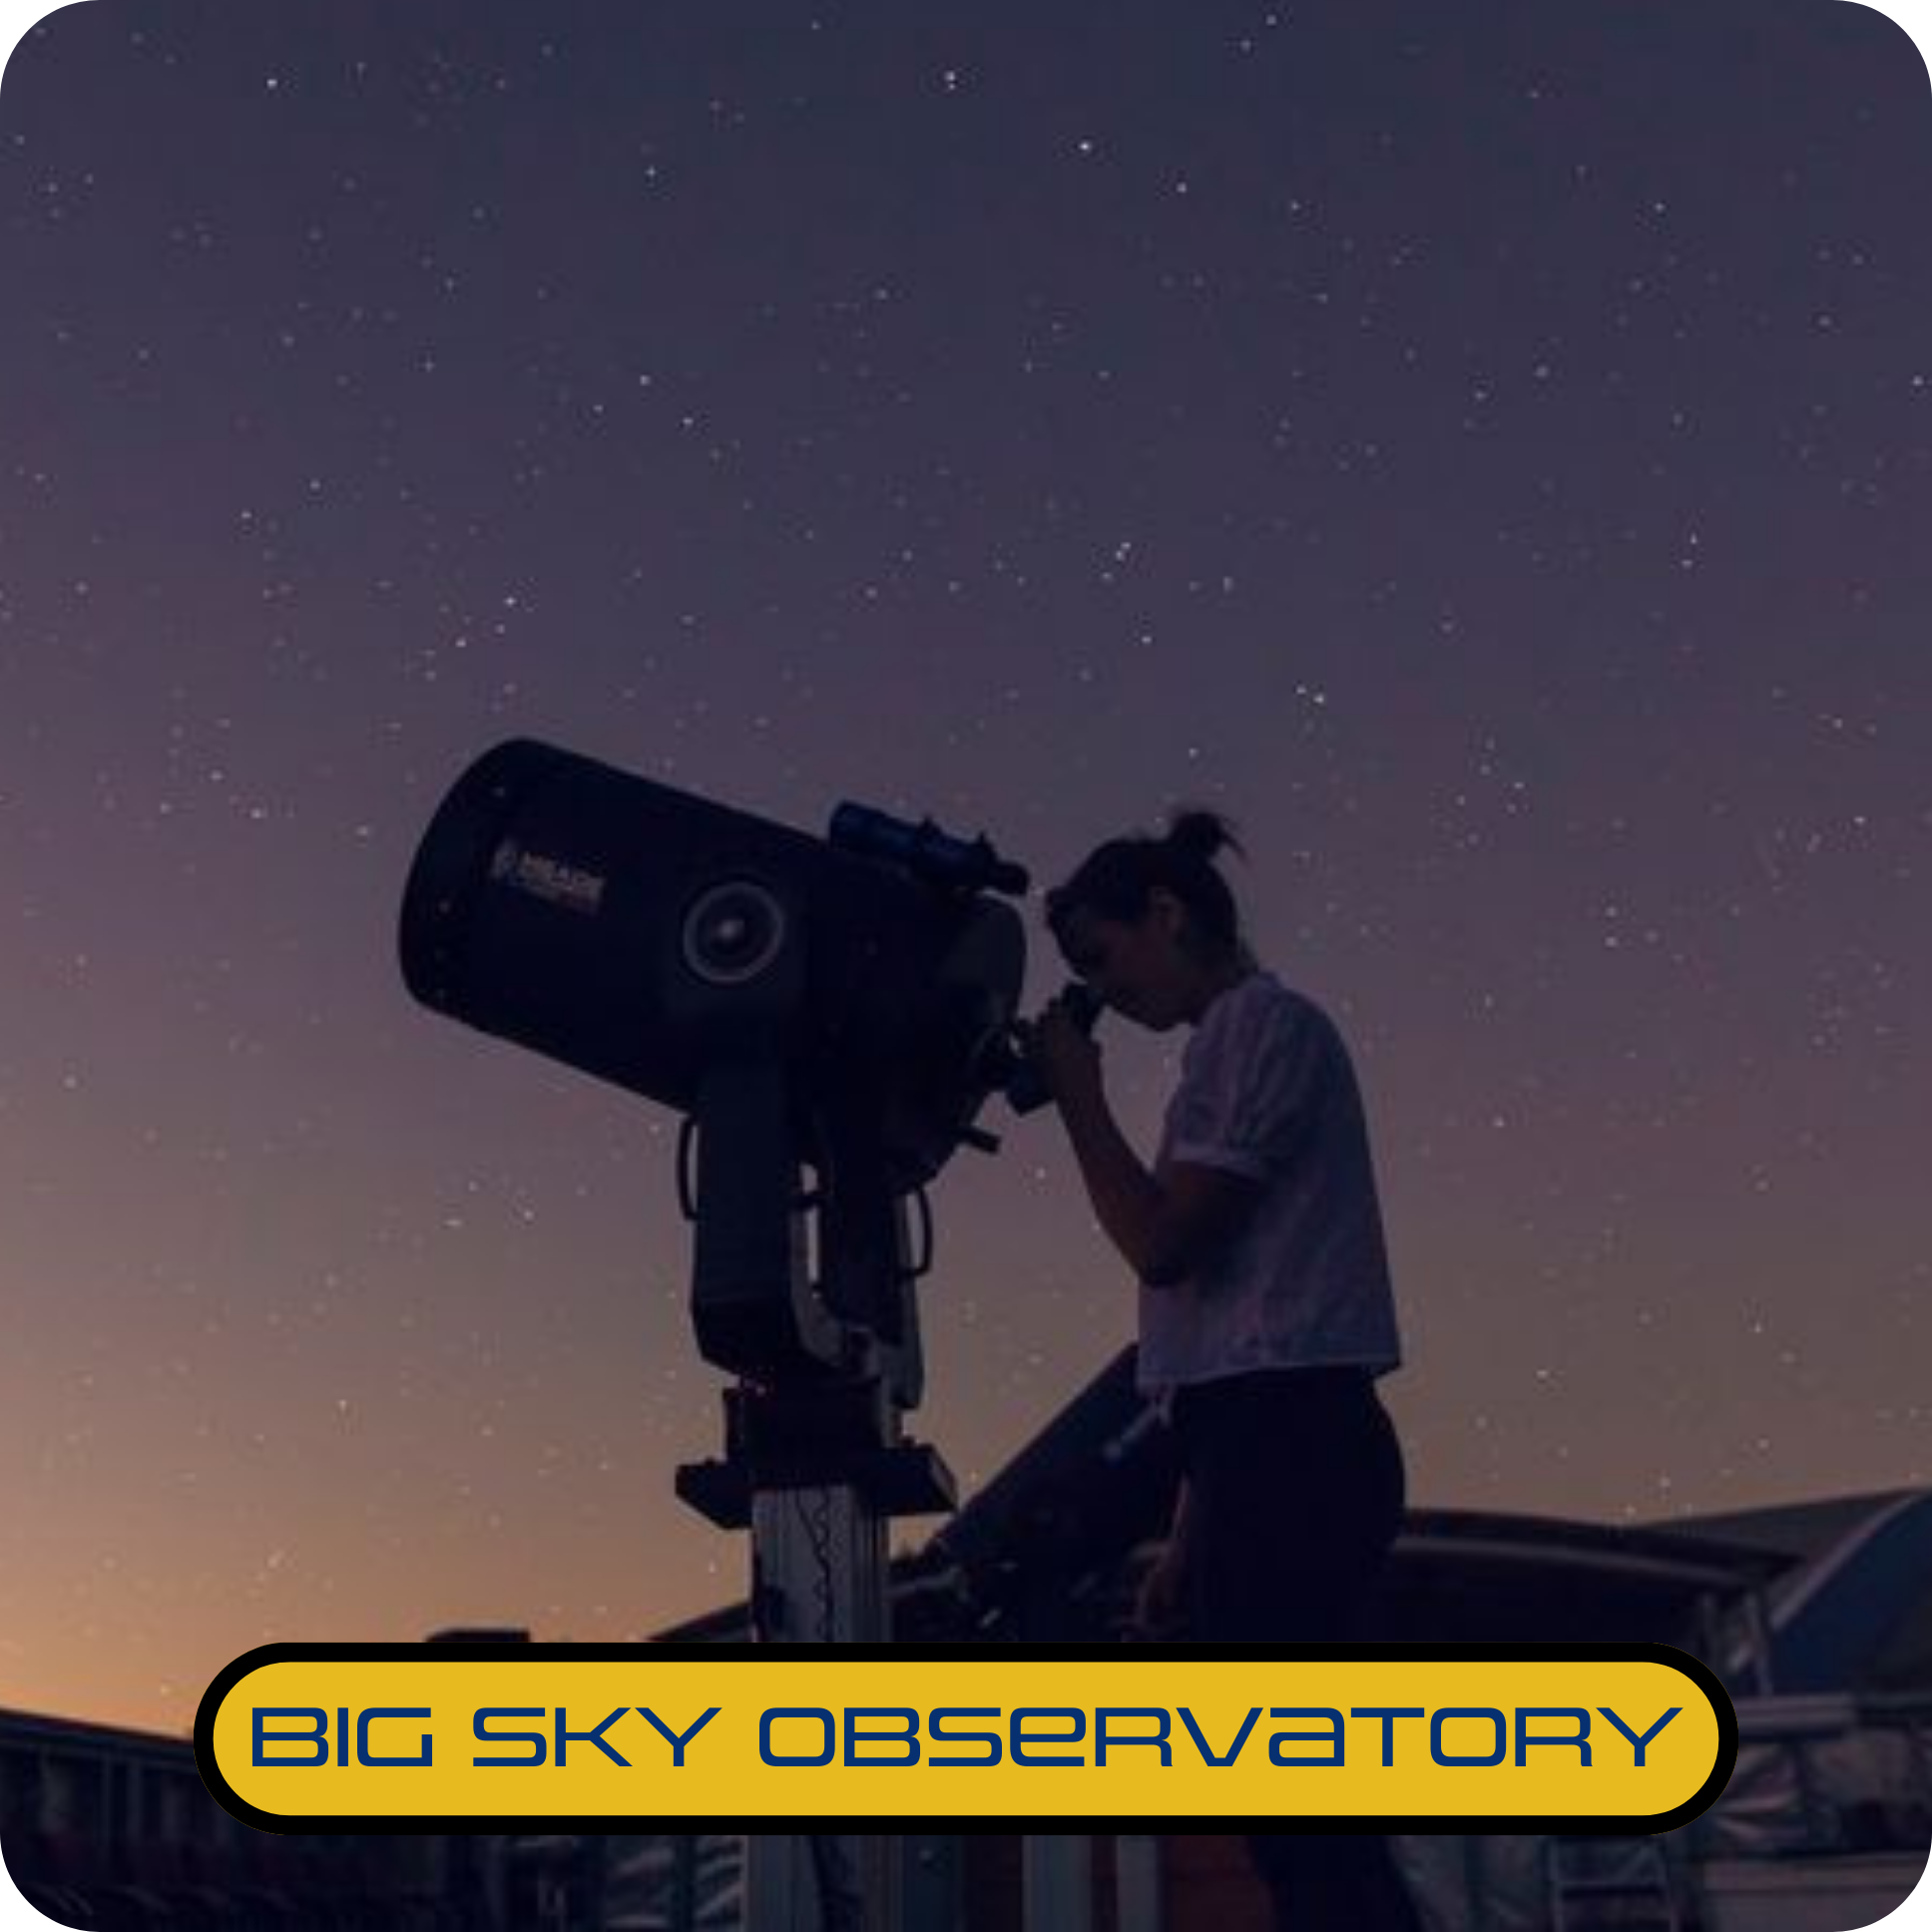 Click to learn more about the Big Sky Observatory Tour